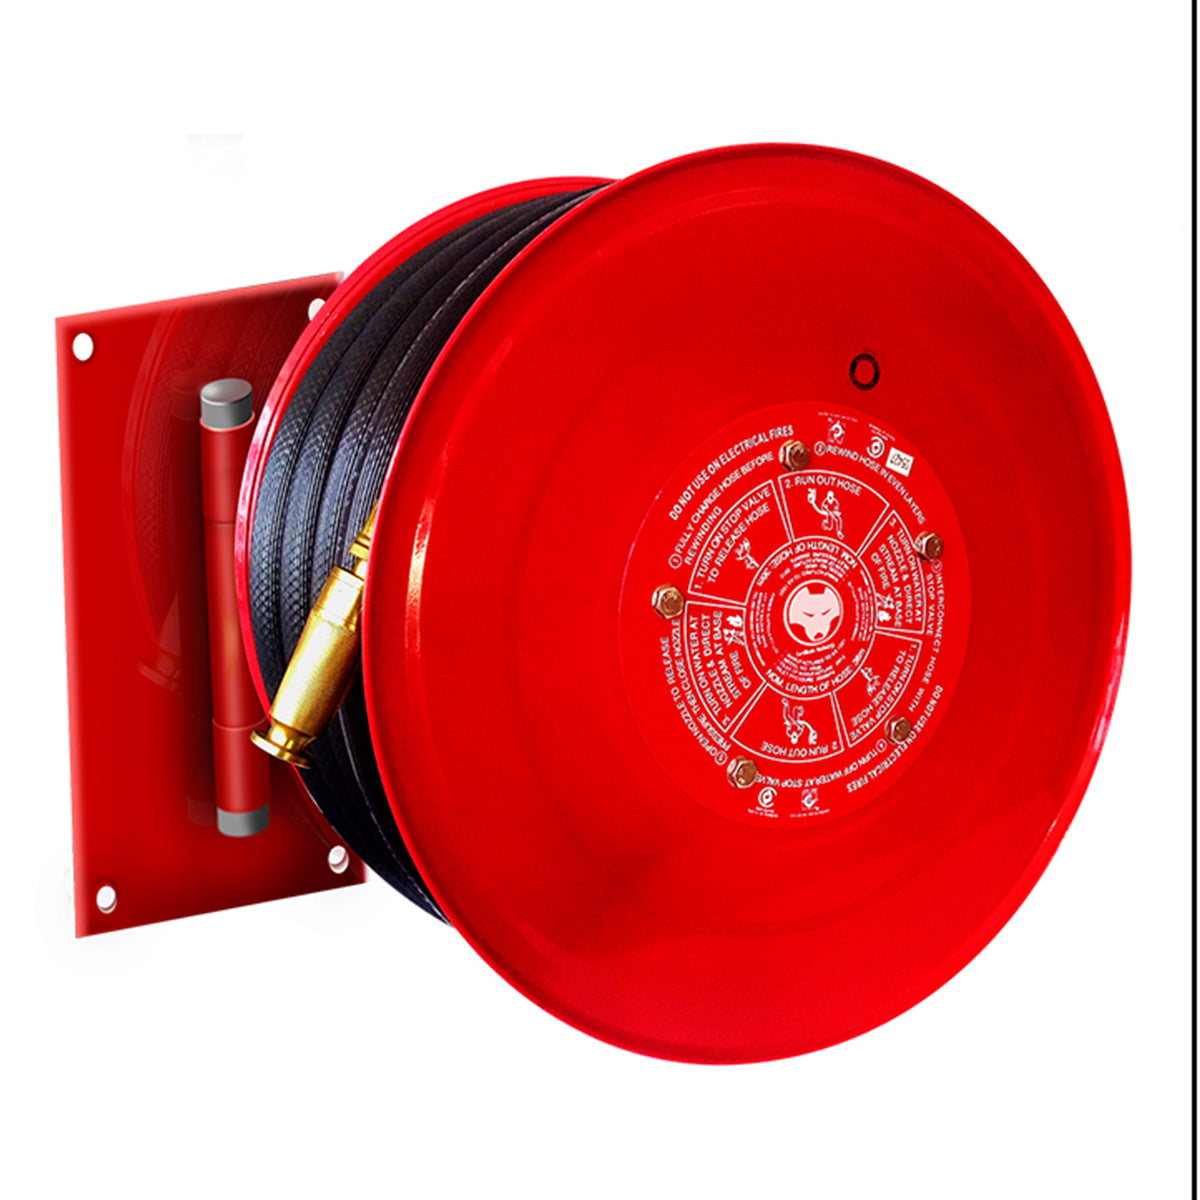 36m x 19mm Swing arm hose Reel - Premium Fire Hose Reels from Wolf - Shop now at Firebox Australia